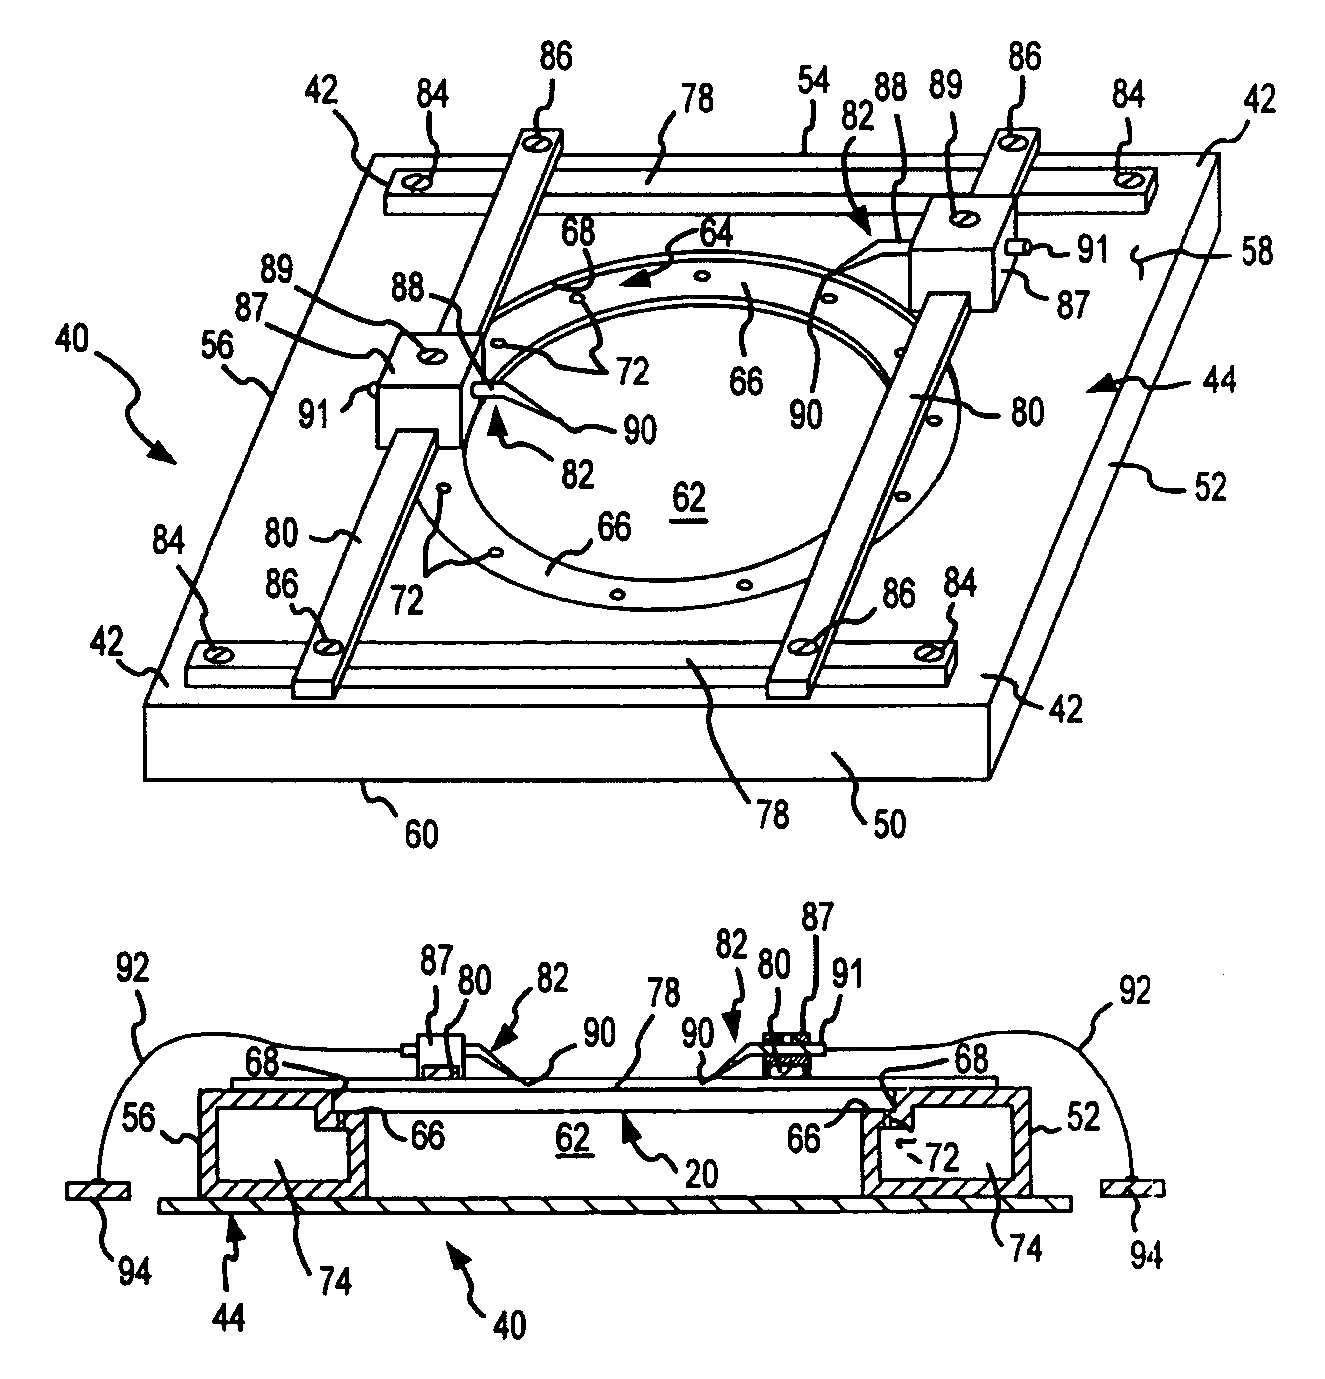 Method for probing a semiconductor wafer